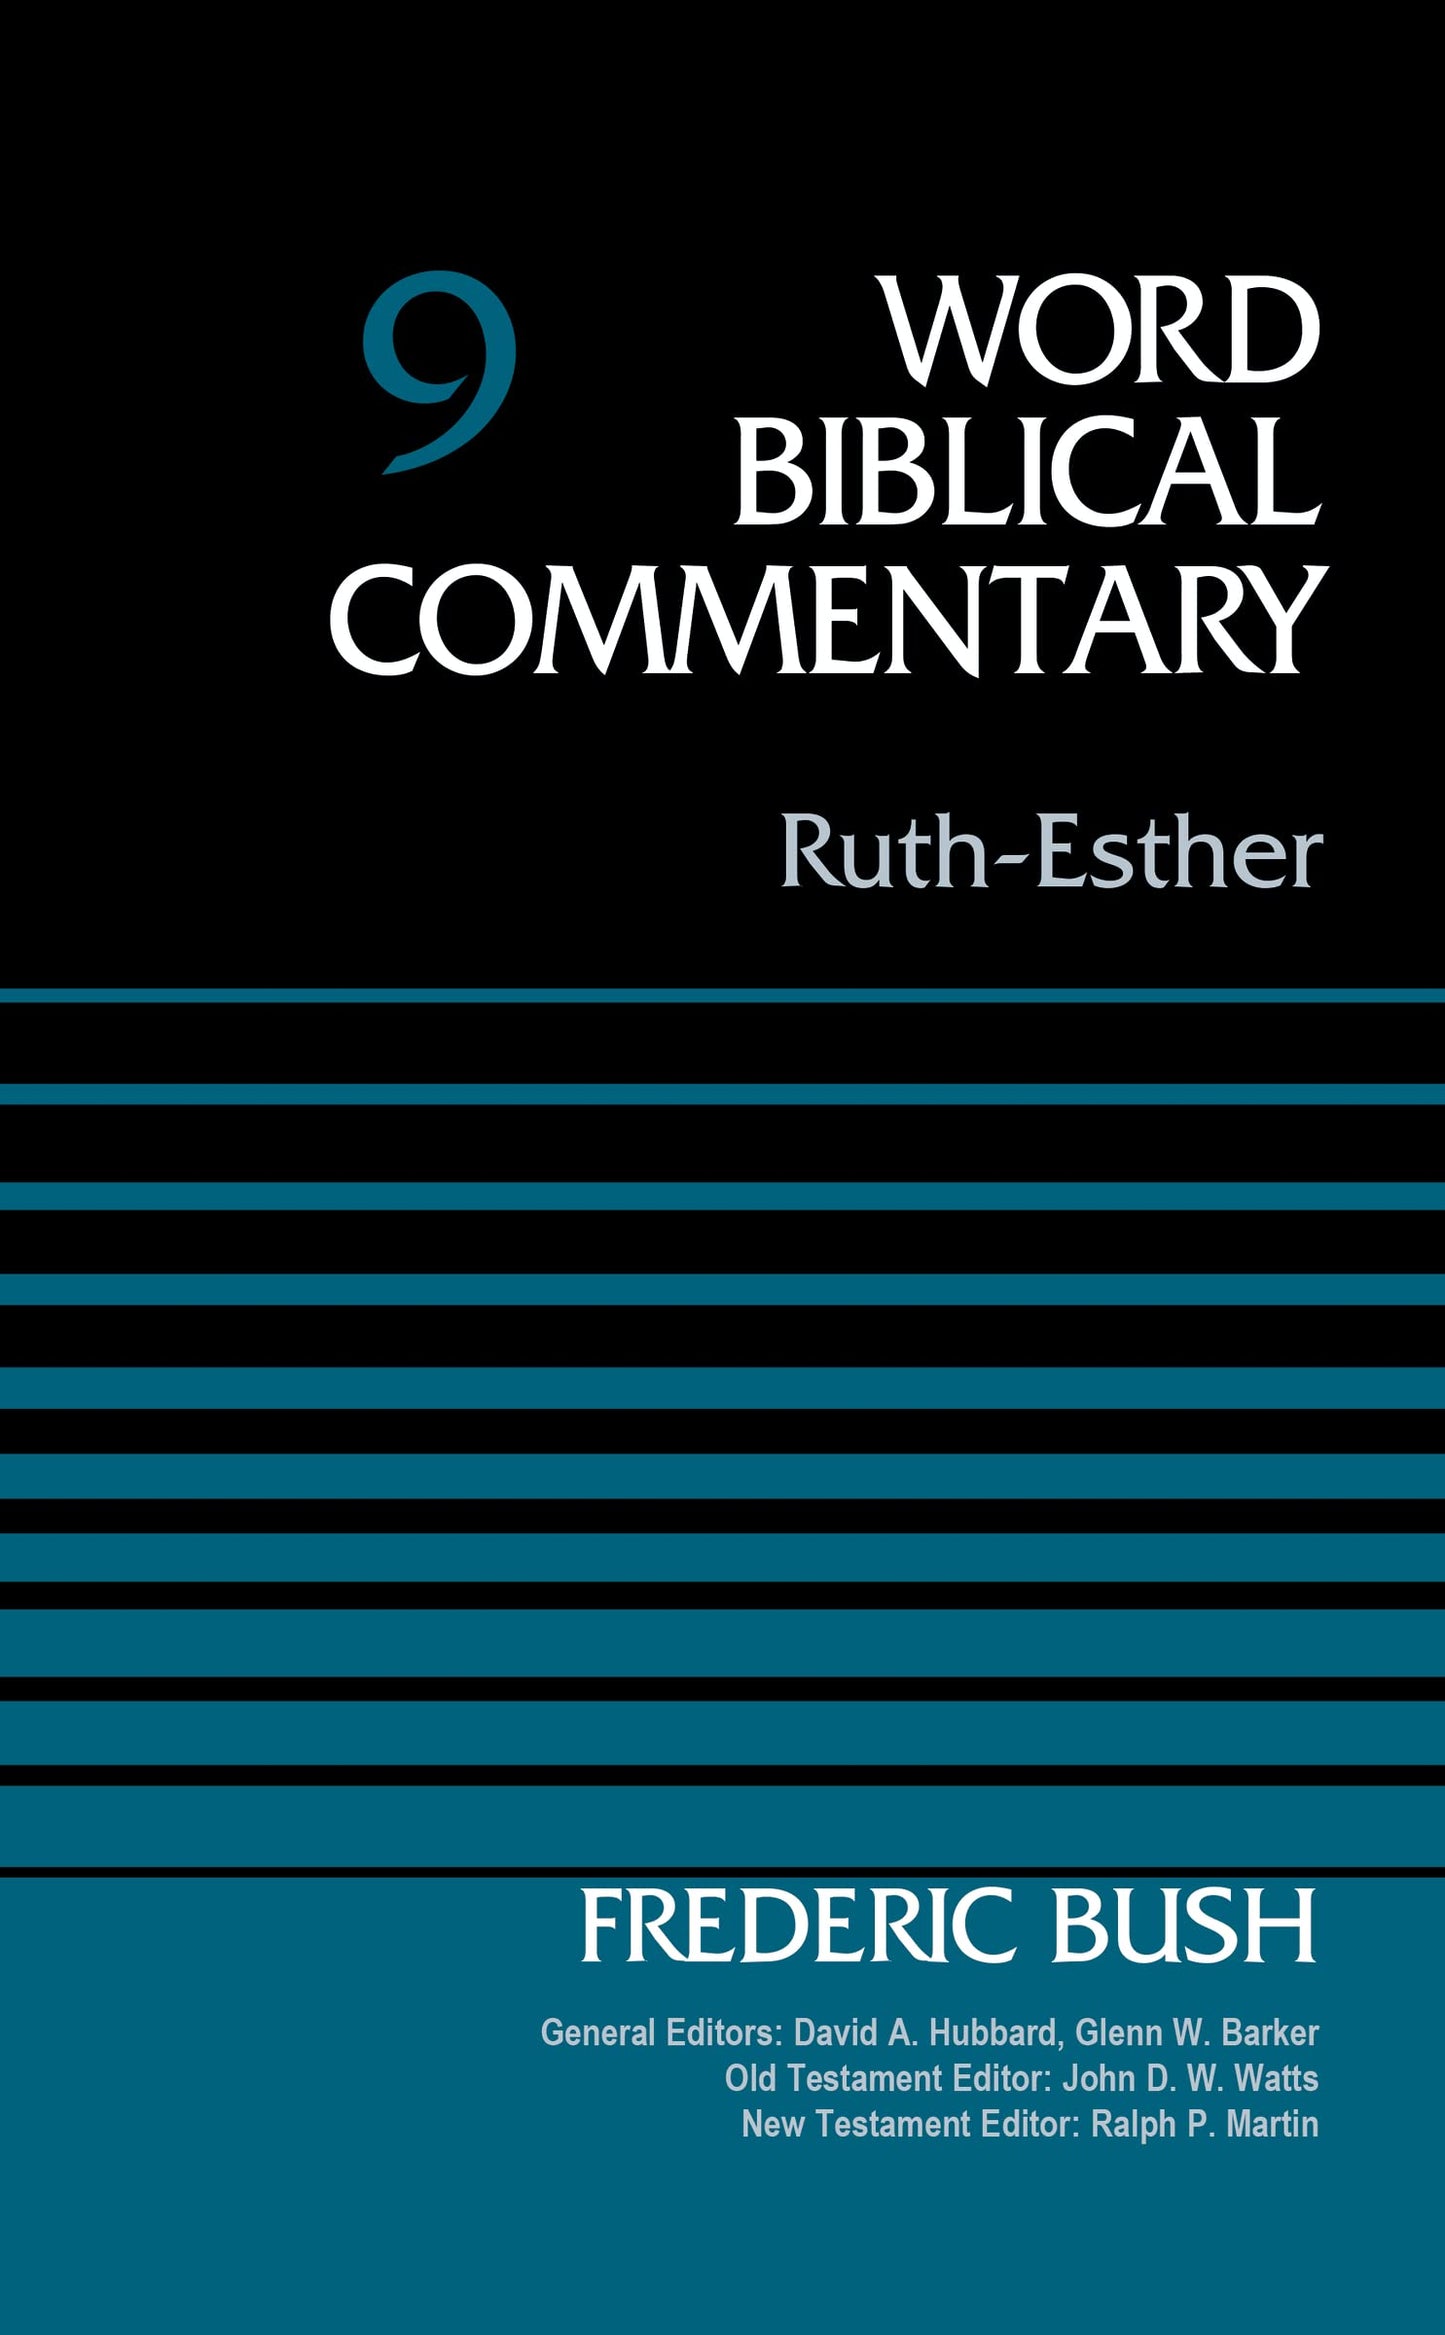 Ruth-Esther, Volume 9 (Bush) (Word Biblical Commentary)